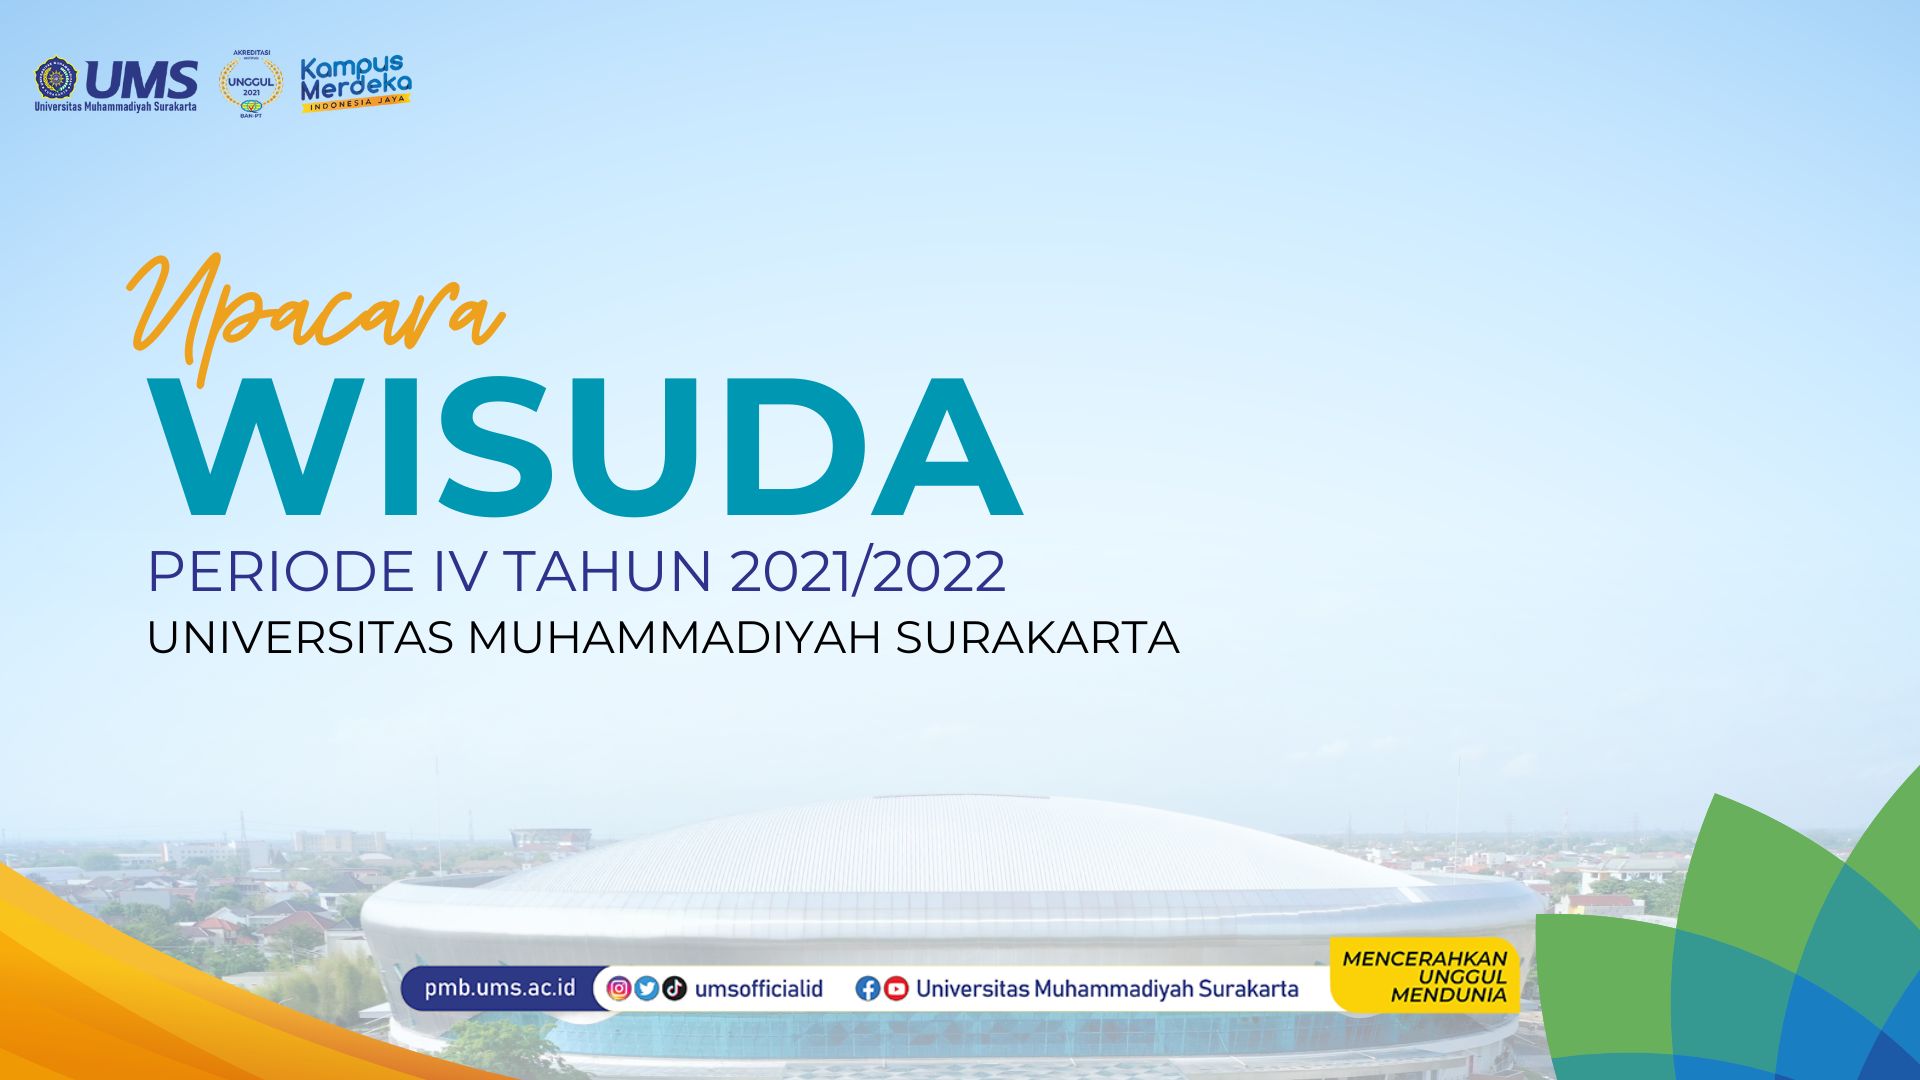 You are currently viewing Dokumentasi Wisuda UMS Periode IV Tahun 2021/2022